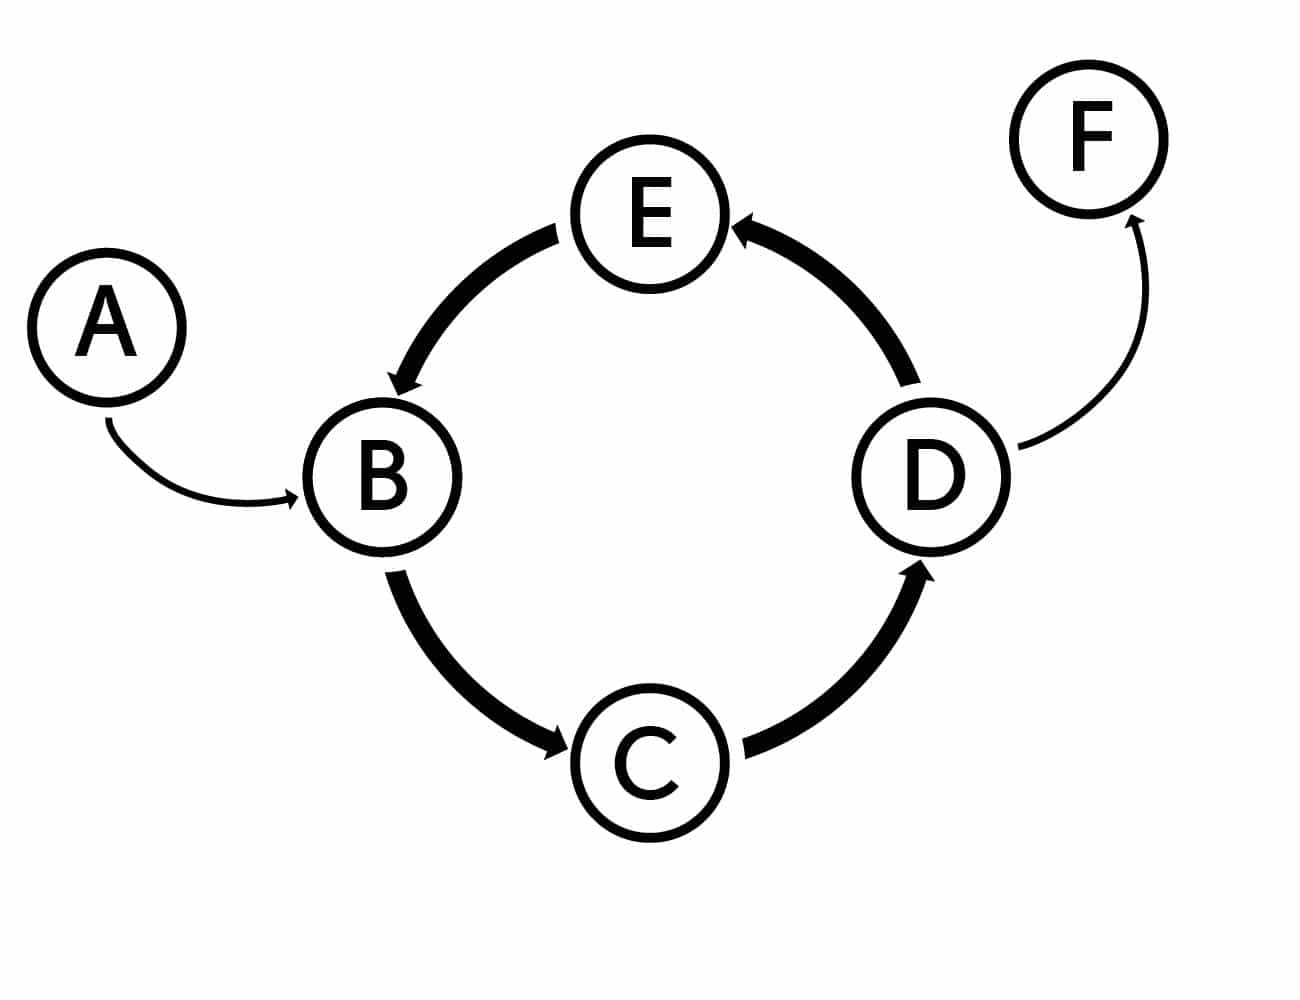 Nodes connected with arrows forming a circle.